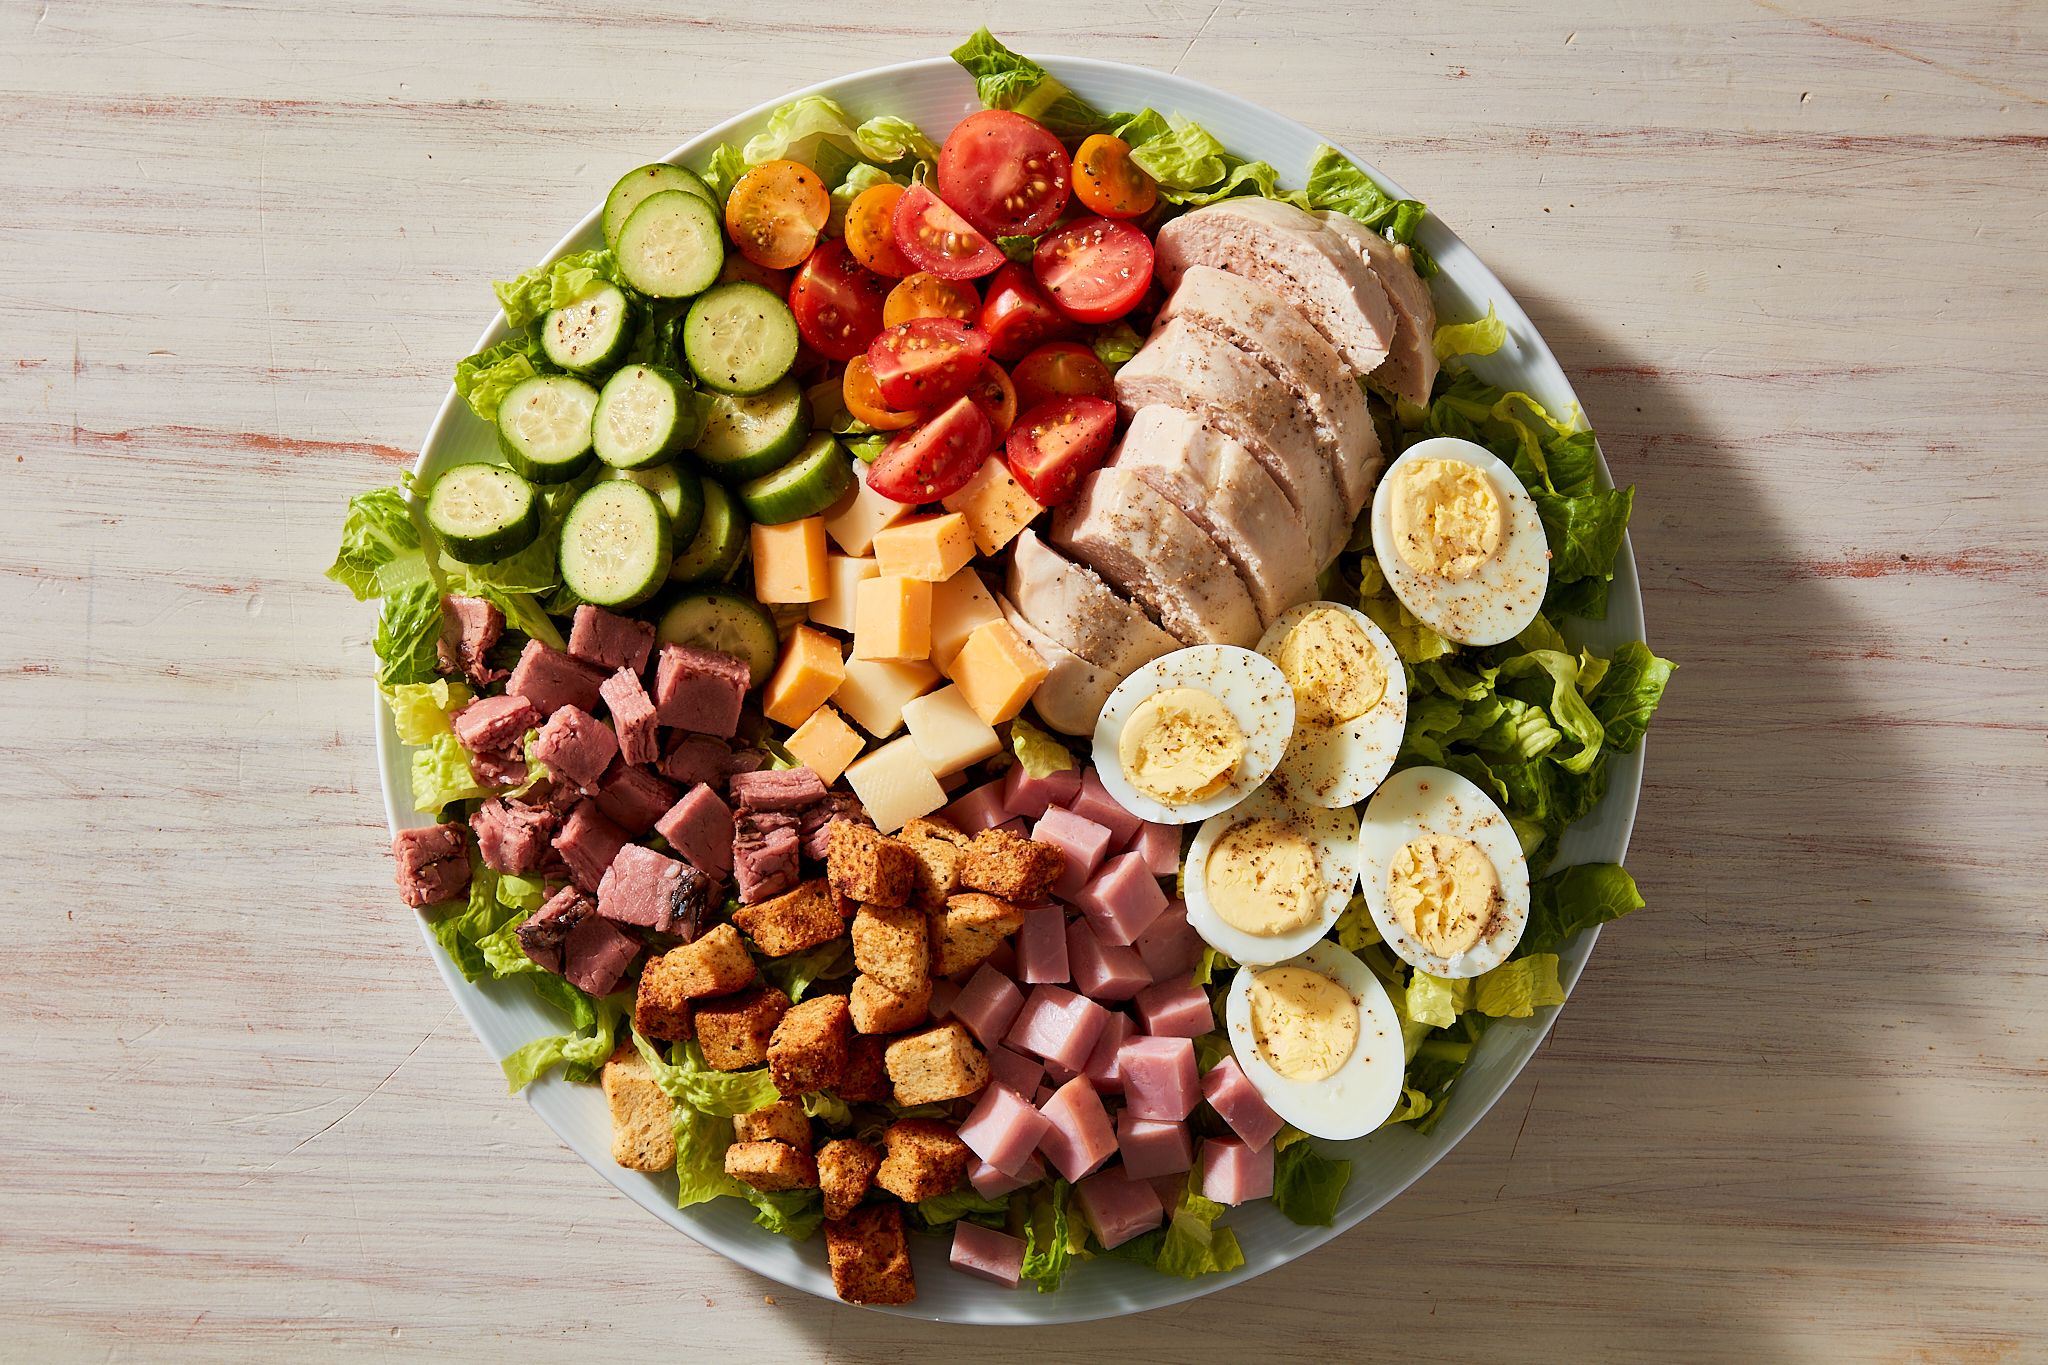 What Restaurant Makes the Best Chef Salad?